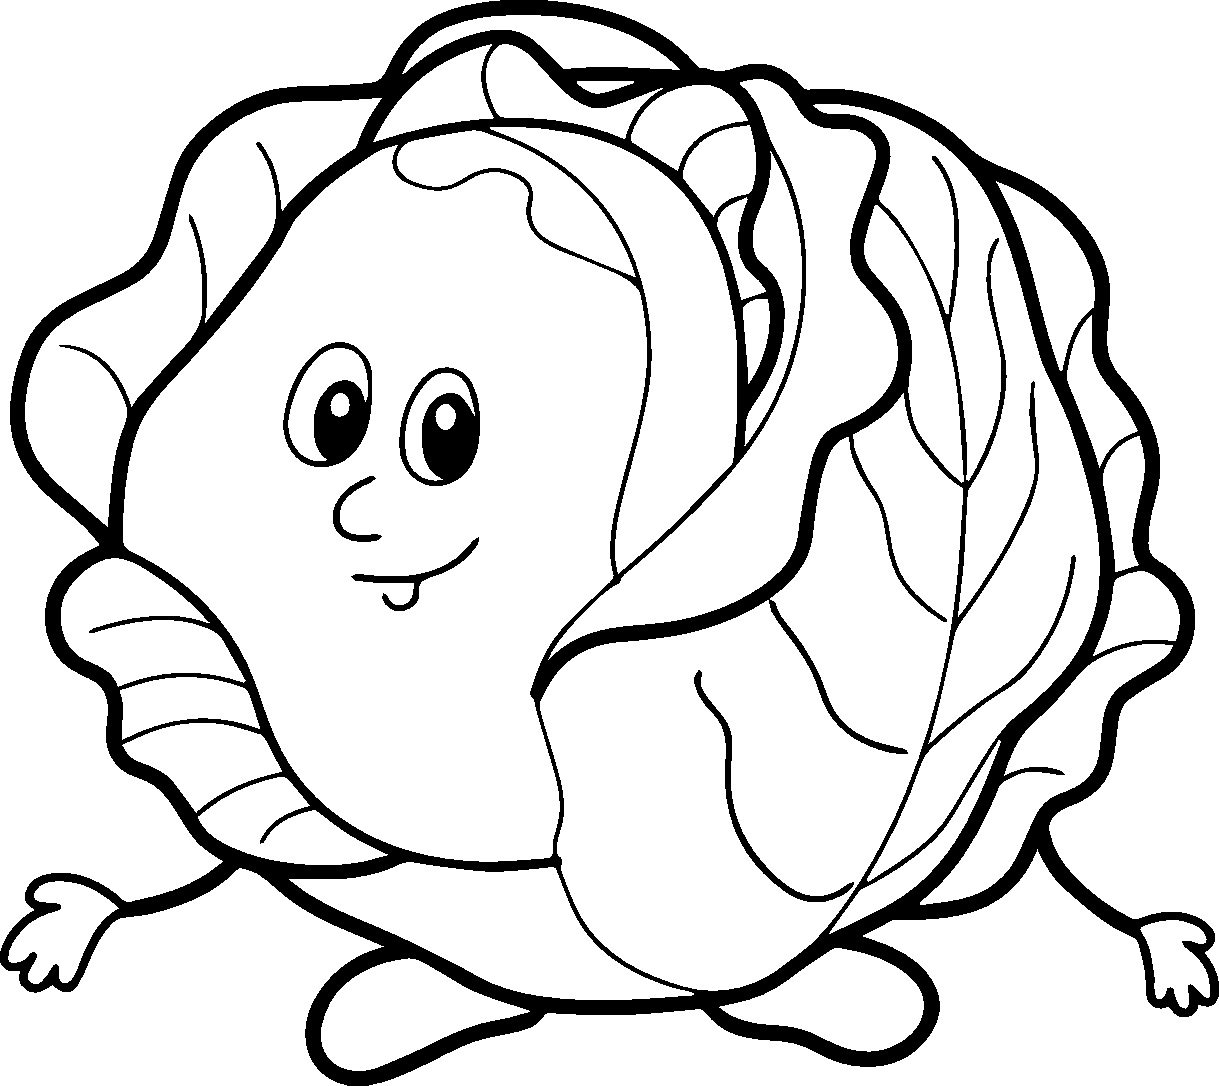 colouring pictures of vegetables vegetables coloring pages kidsuki of pictures colouring vegetables 